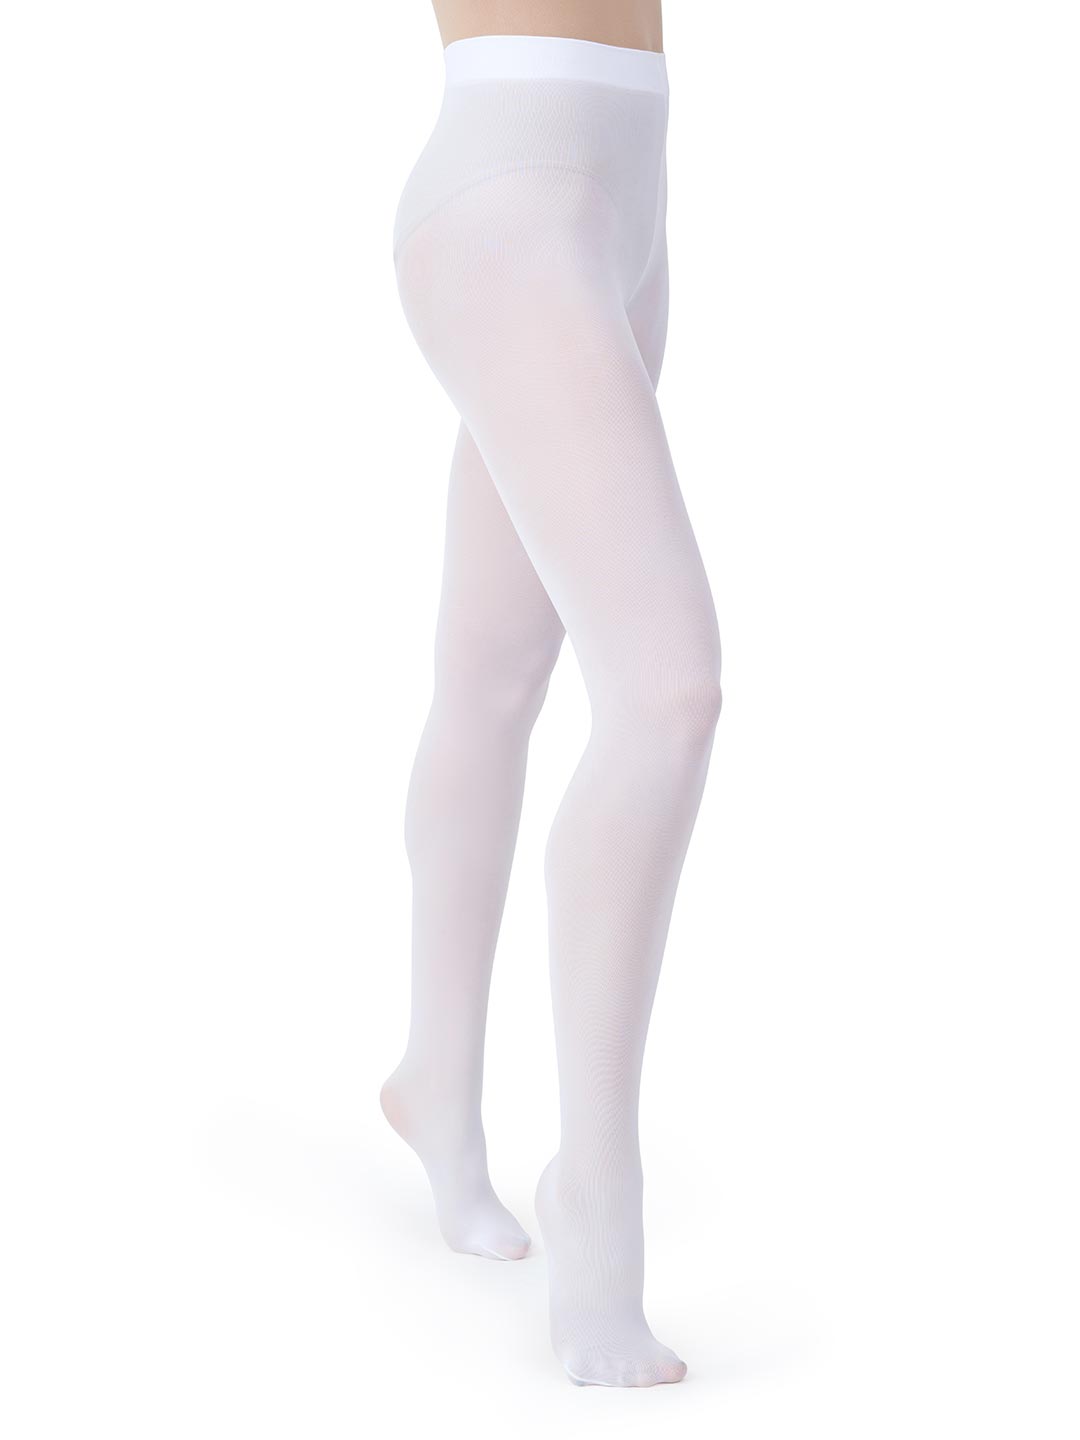 Capezio 1916 Ultra Soft Transition Tights (Adult) - ShopperBoard